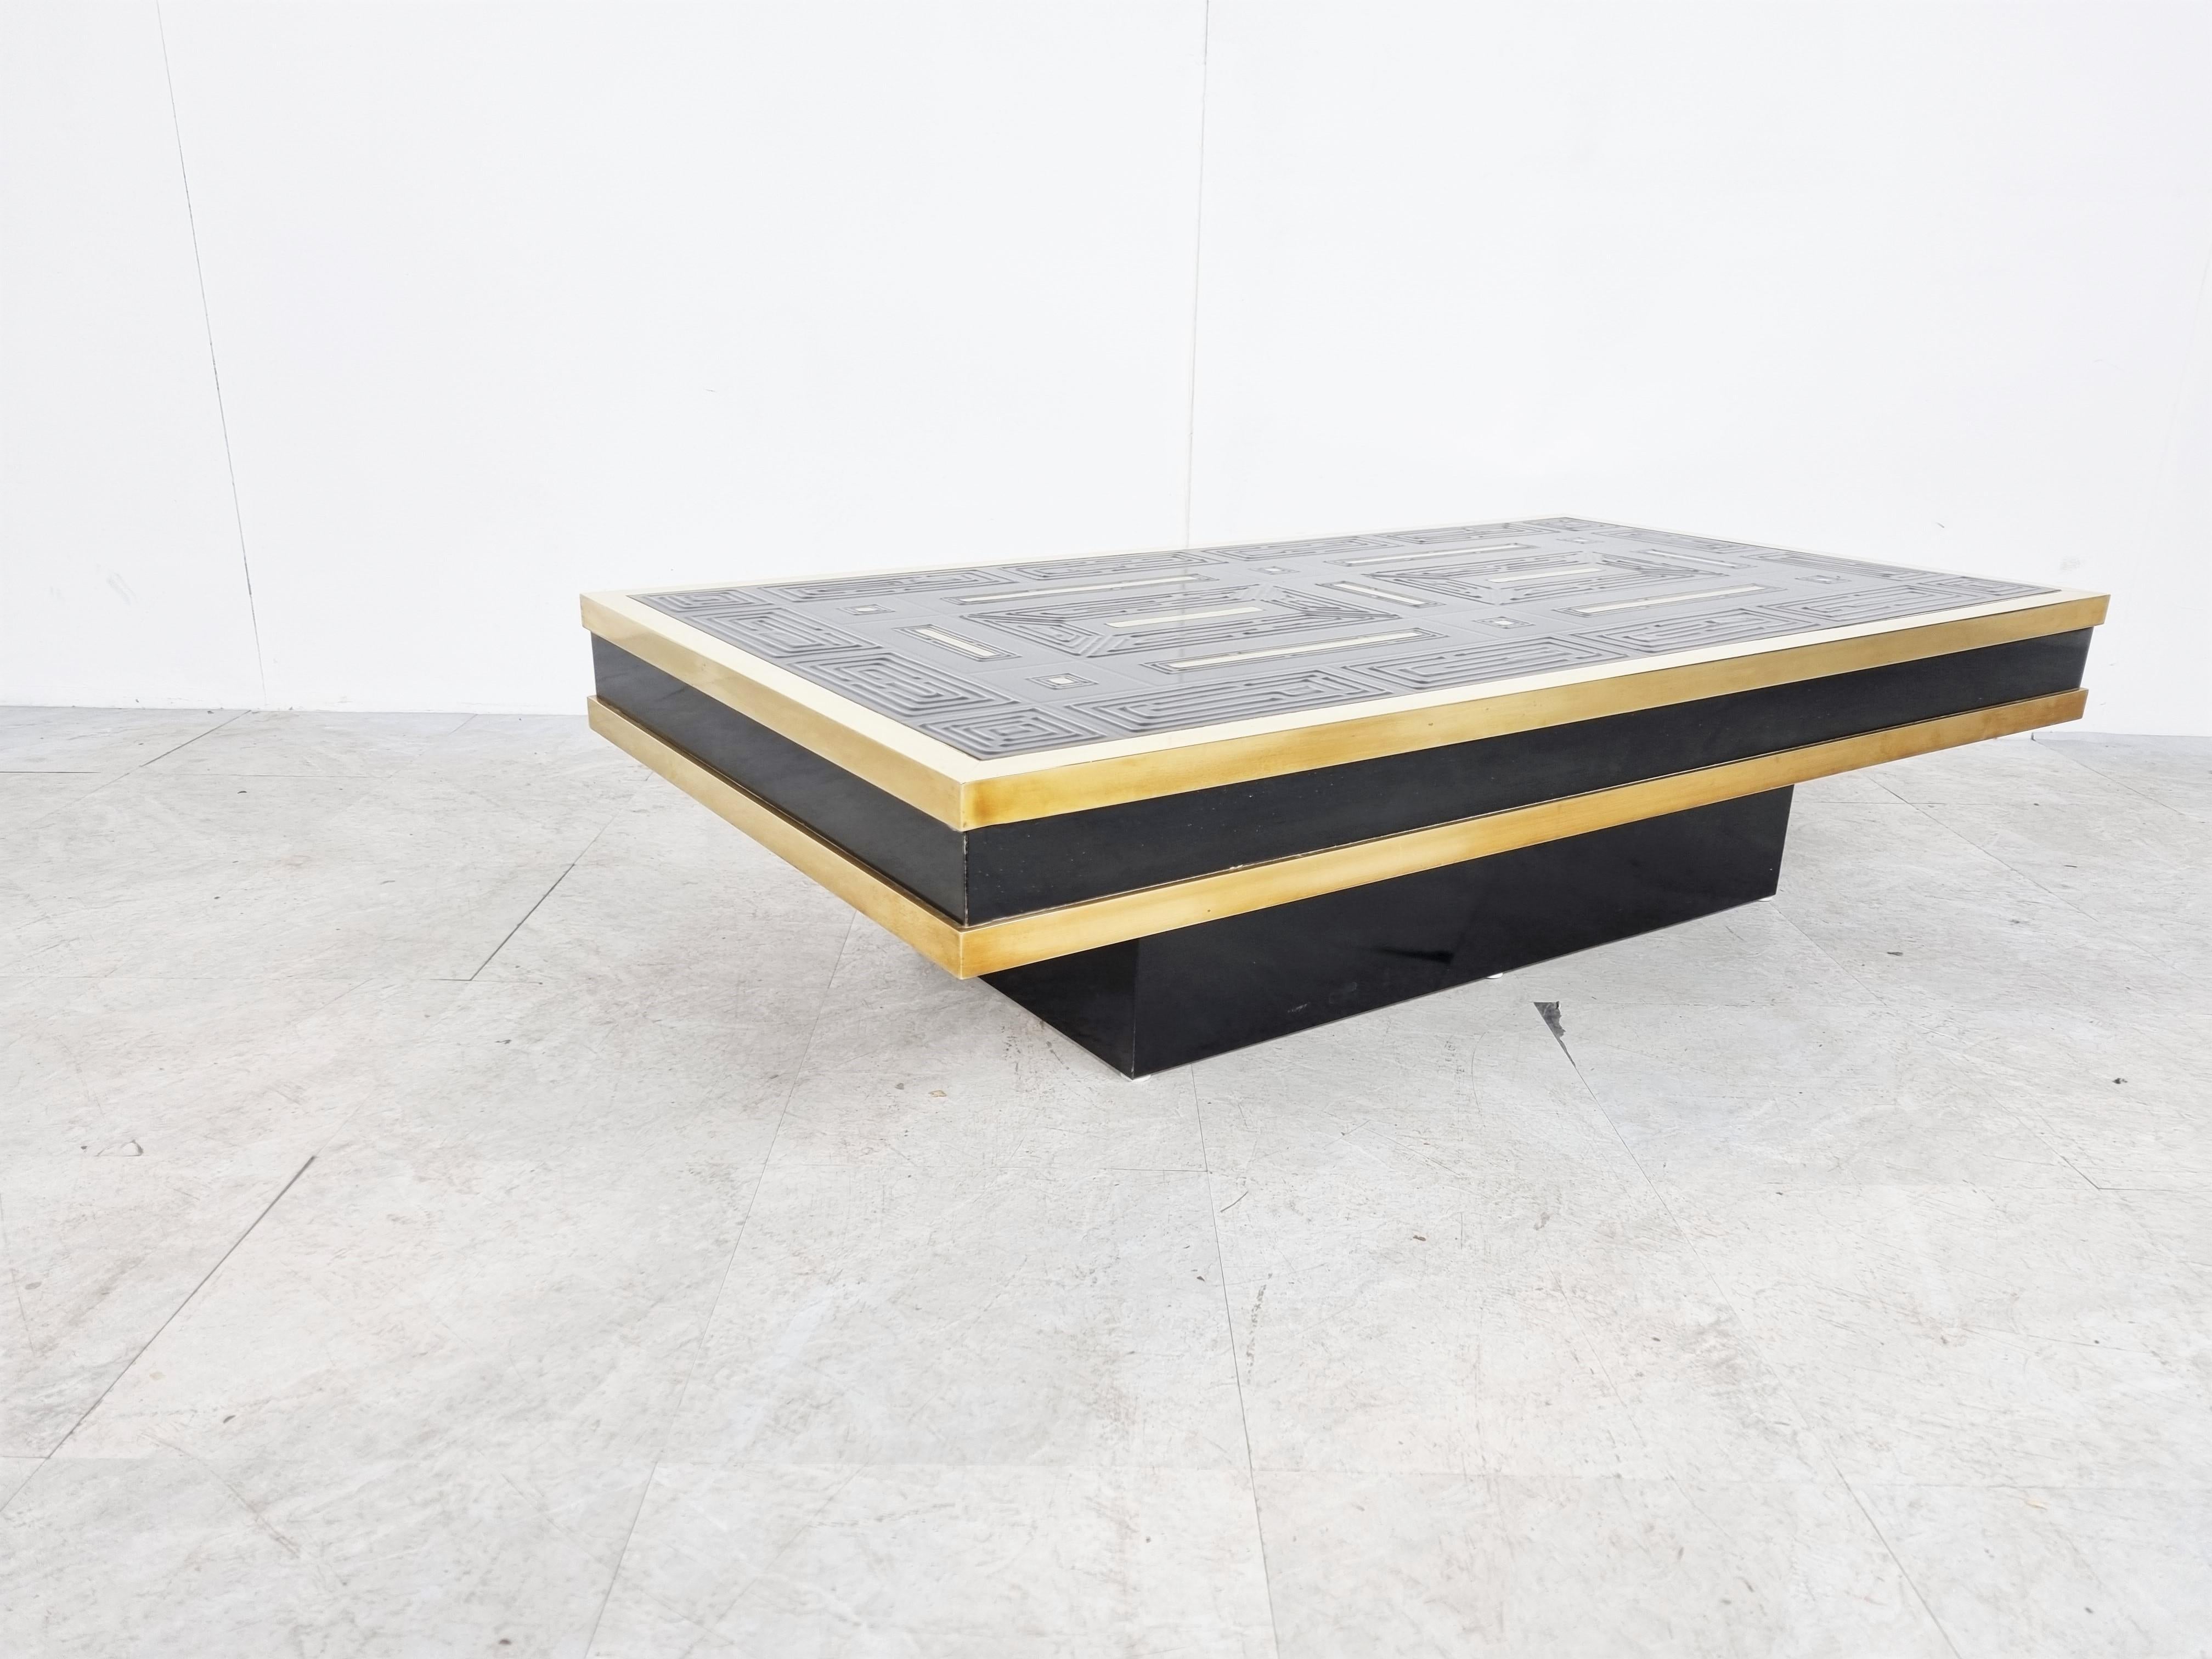 Rare ceramic graphical design coffee table with black ceramic tyles and brass.

The base is made from lacquered wood.

Signed by Denisco.

Very good condition

1970s - Belgium

Dimensions:
Height: 31cm/12.20